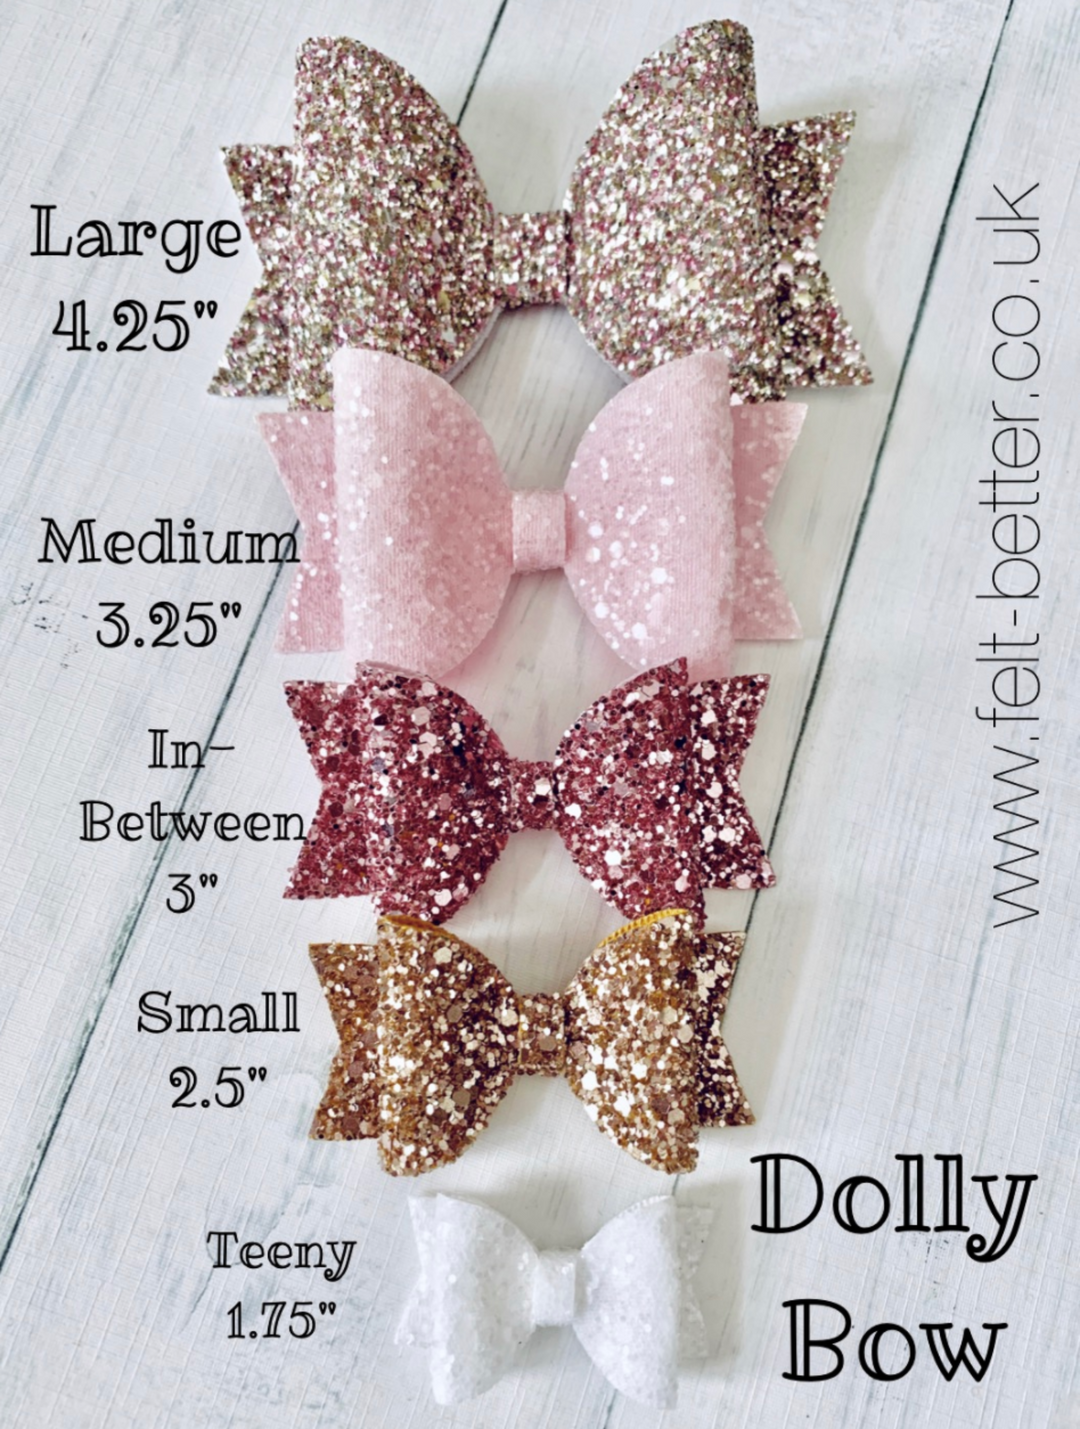 Dolly Bow Trio Bow Die - Small, Medium and Large - Sizzix Big Shot Compatible, by Felt Better UK